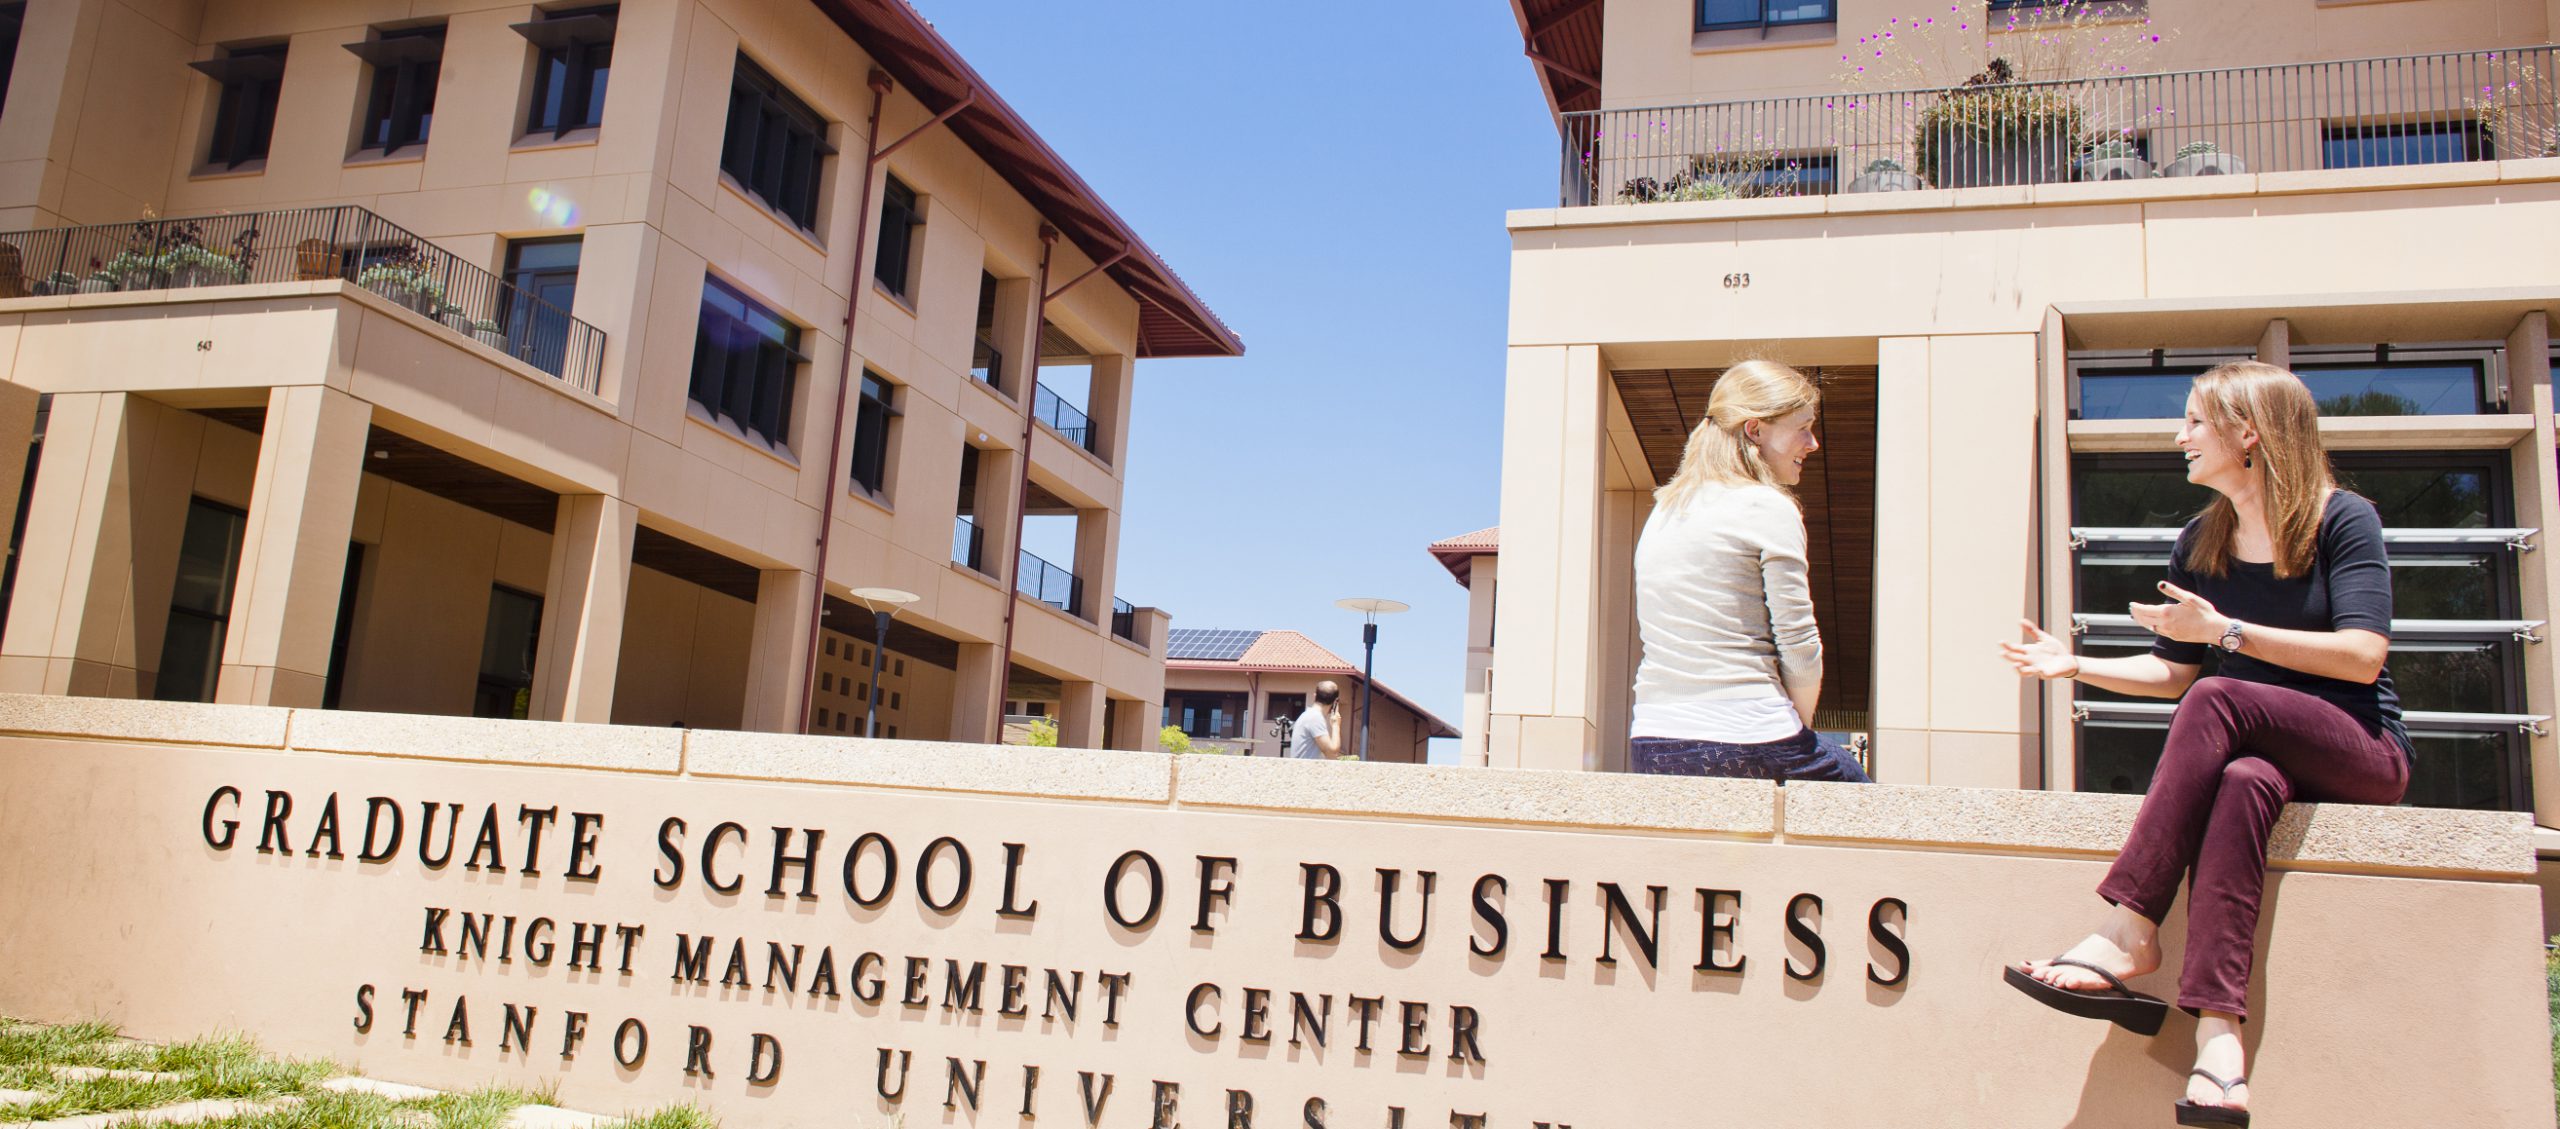 Stanford GSB MBA Deadlines for 2020-2021